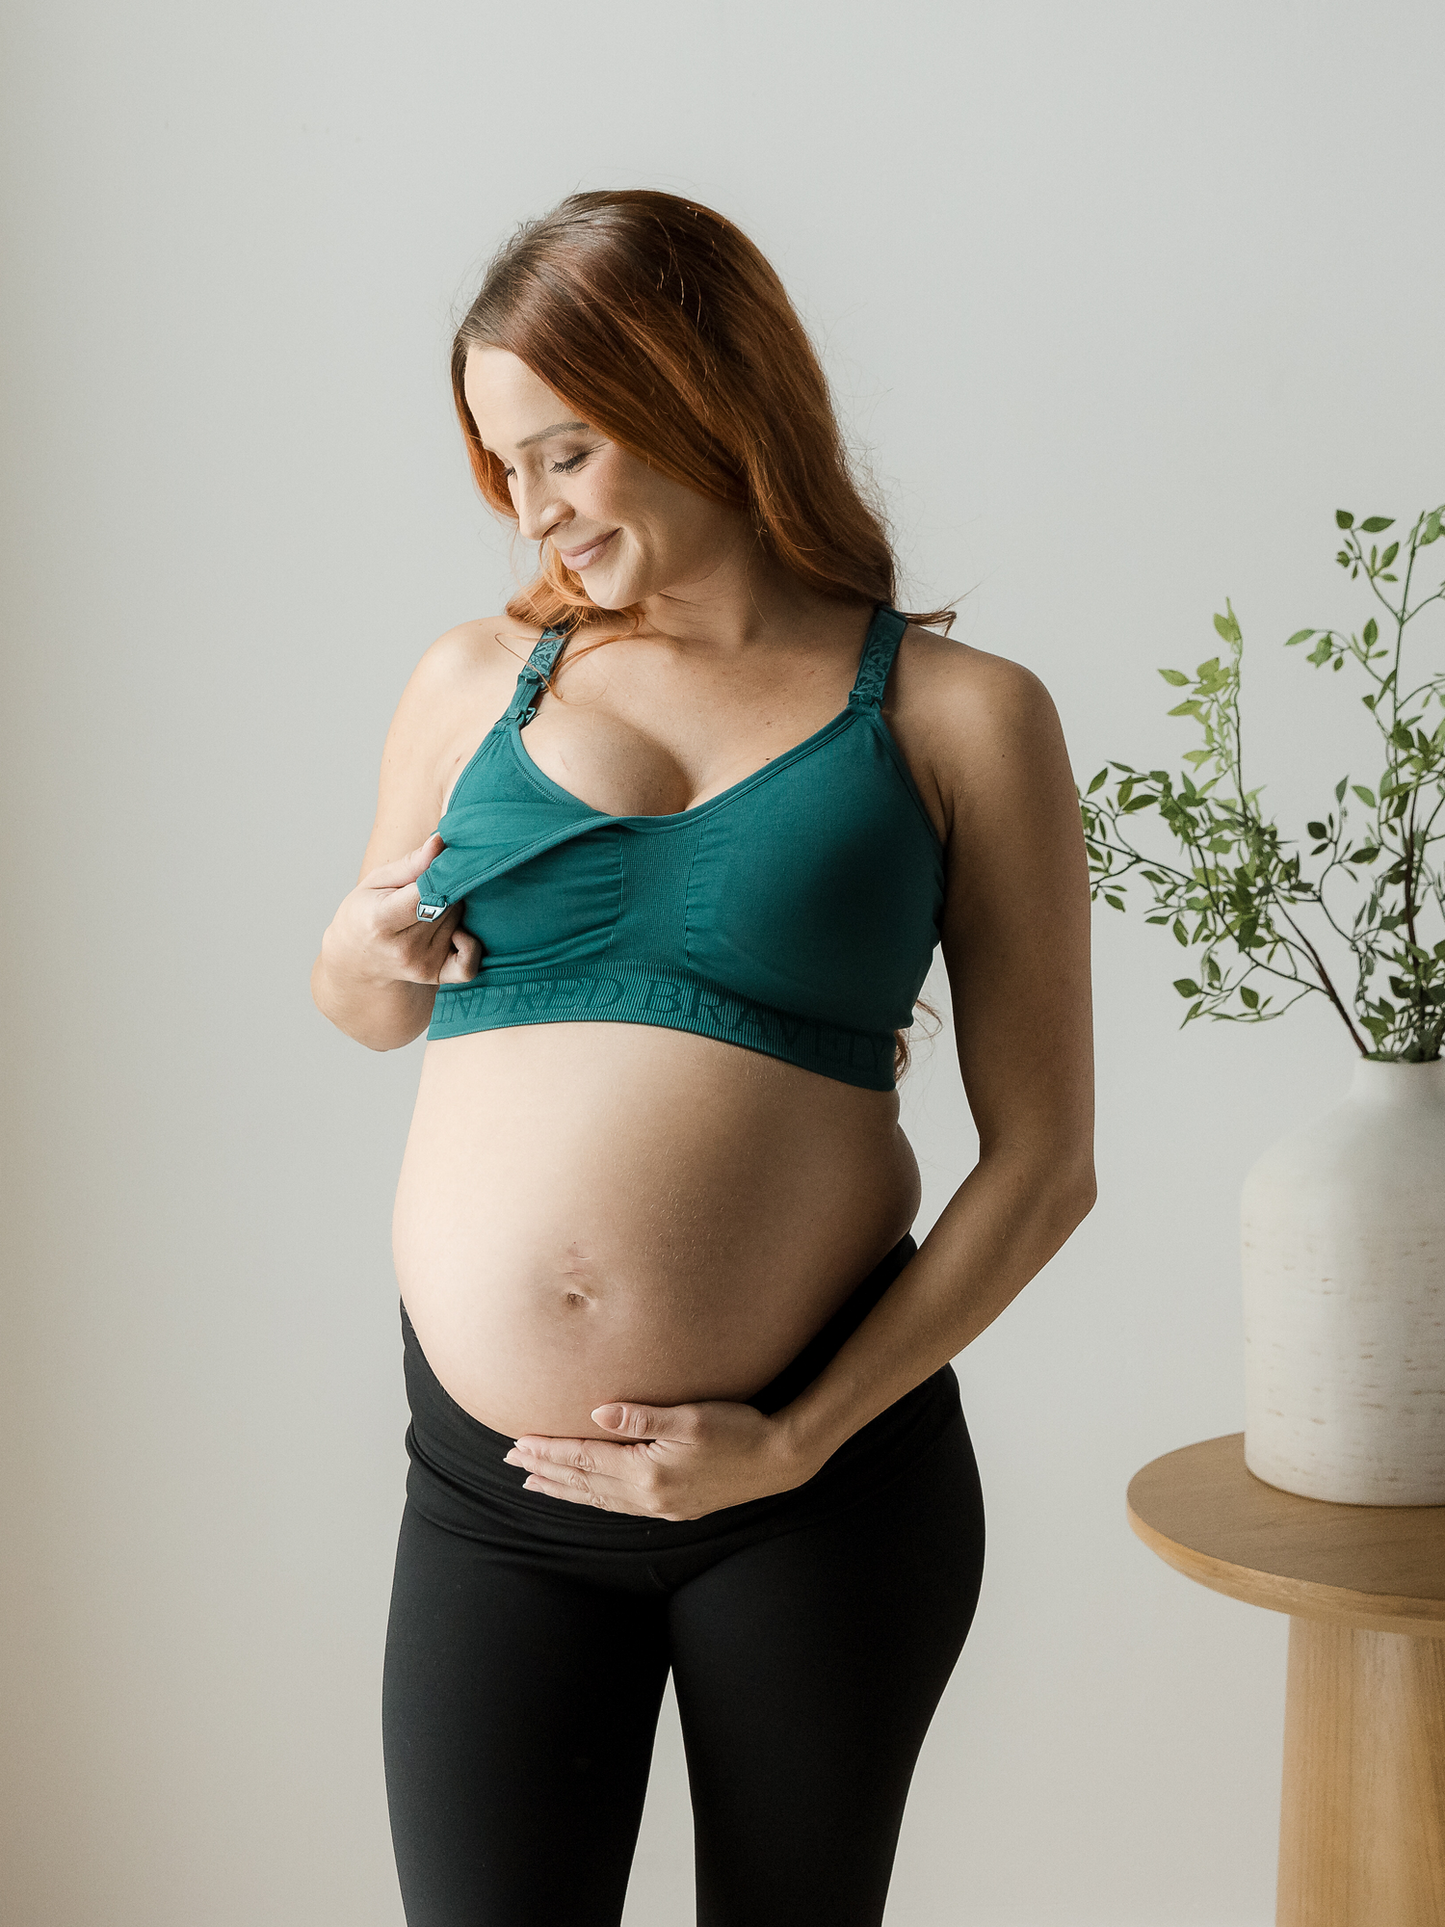 Pregnant model wearing the Sublime® Hands-Free Pumping & Nursing Sports Bra in Teal.@model_info:Shannon is wearing a Small Busty.